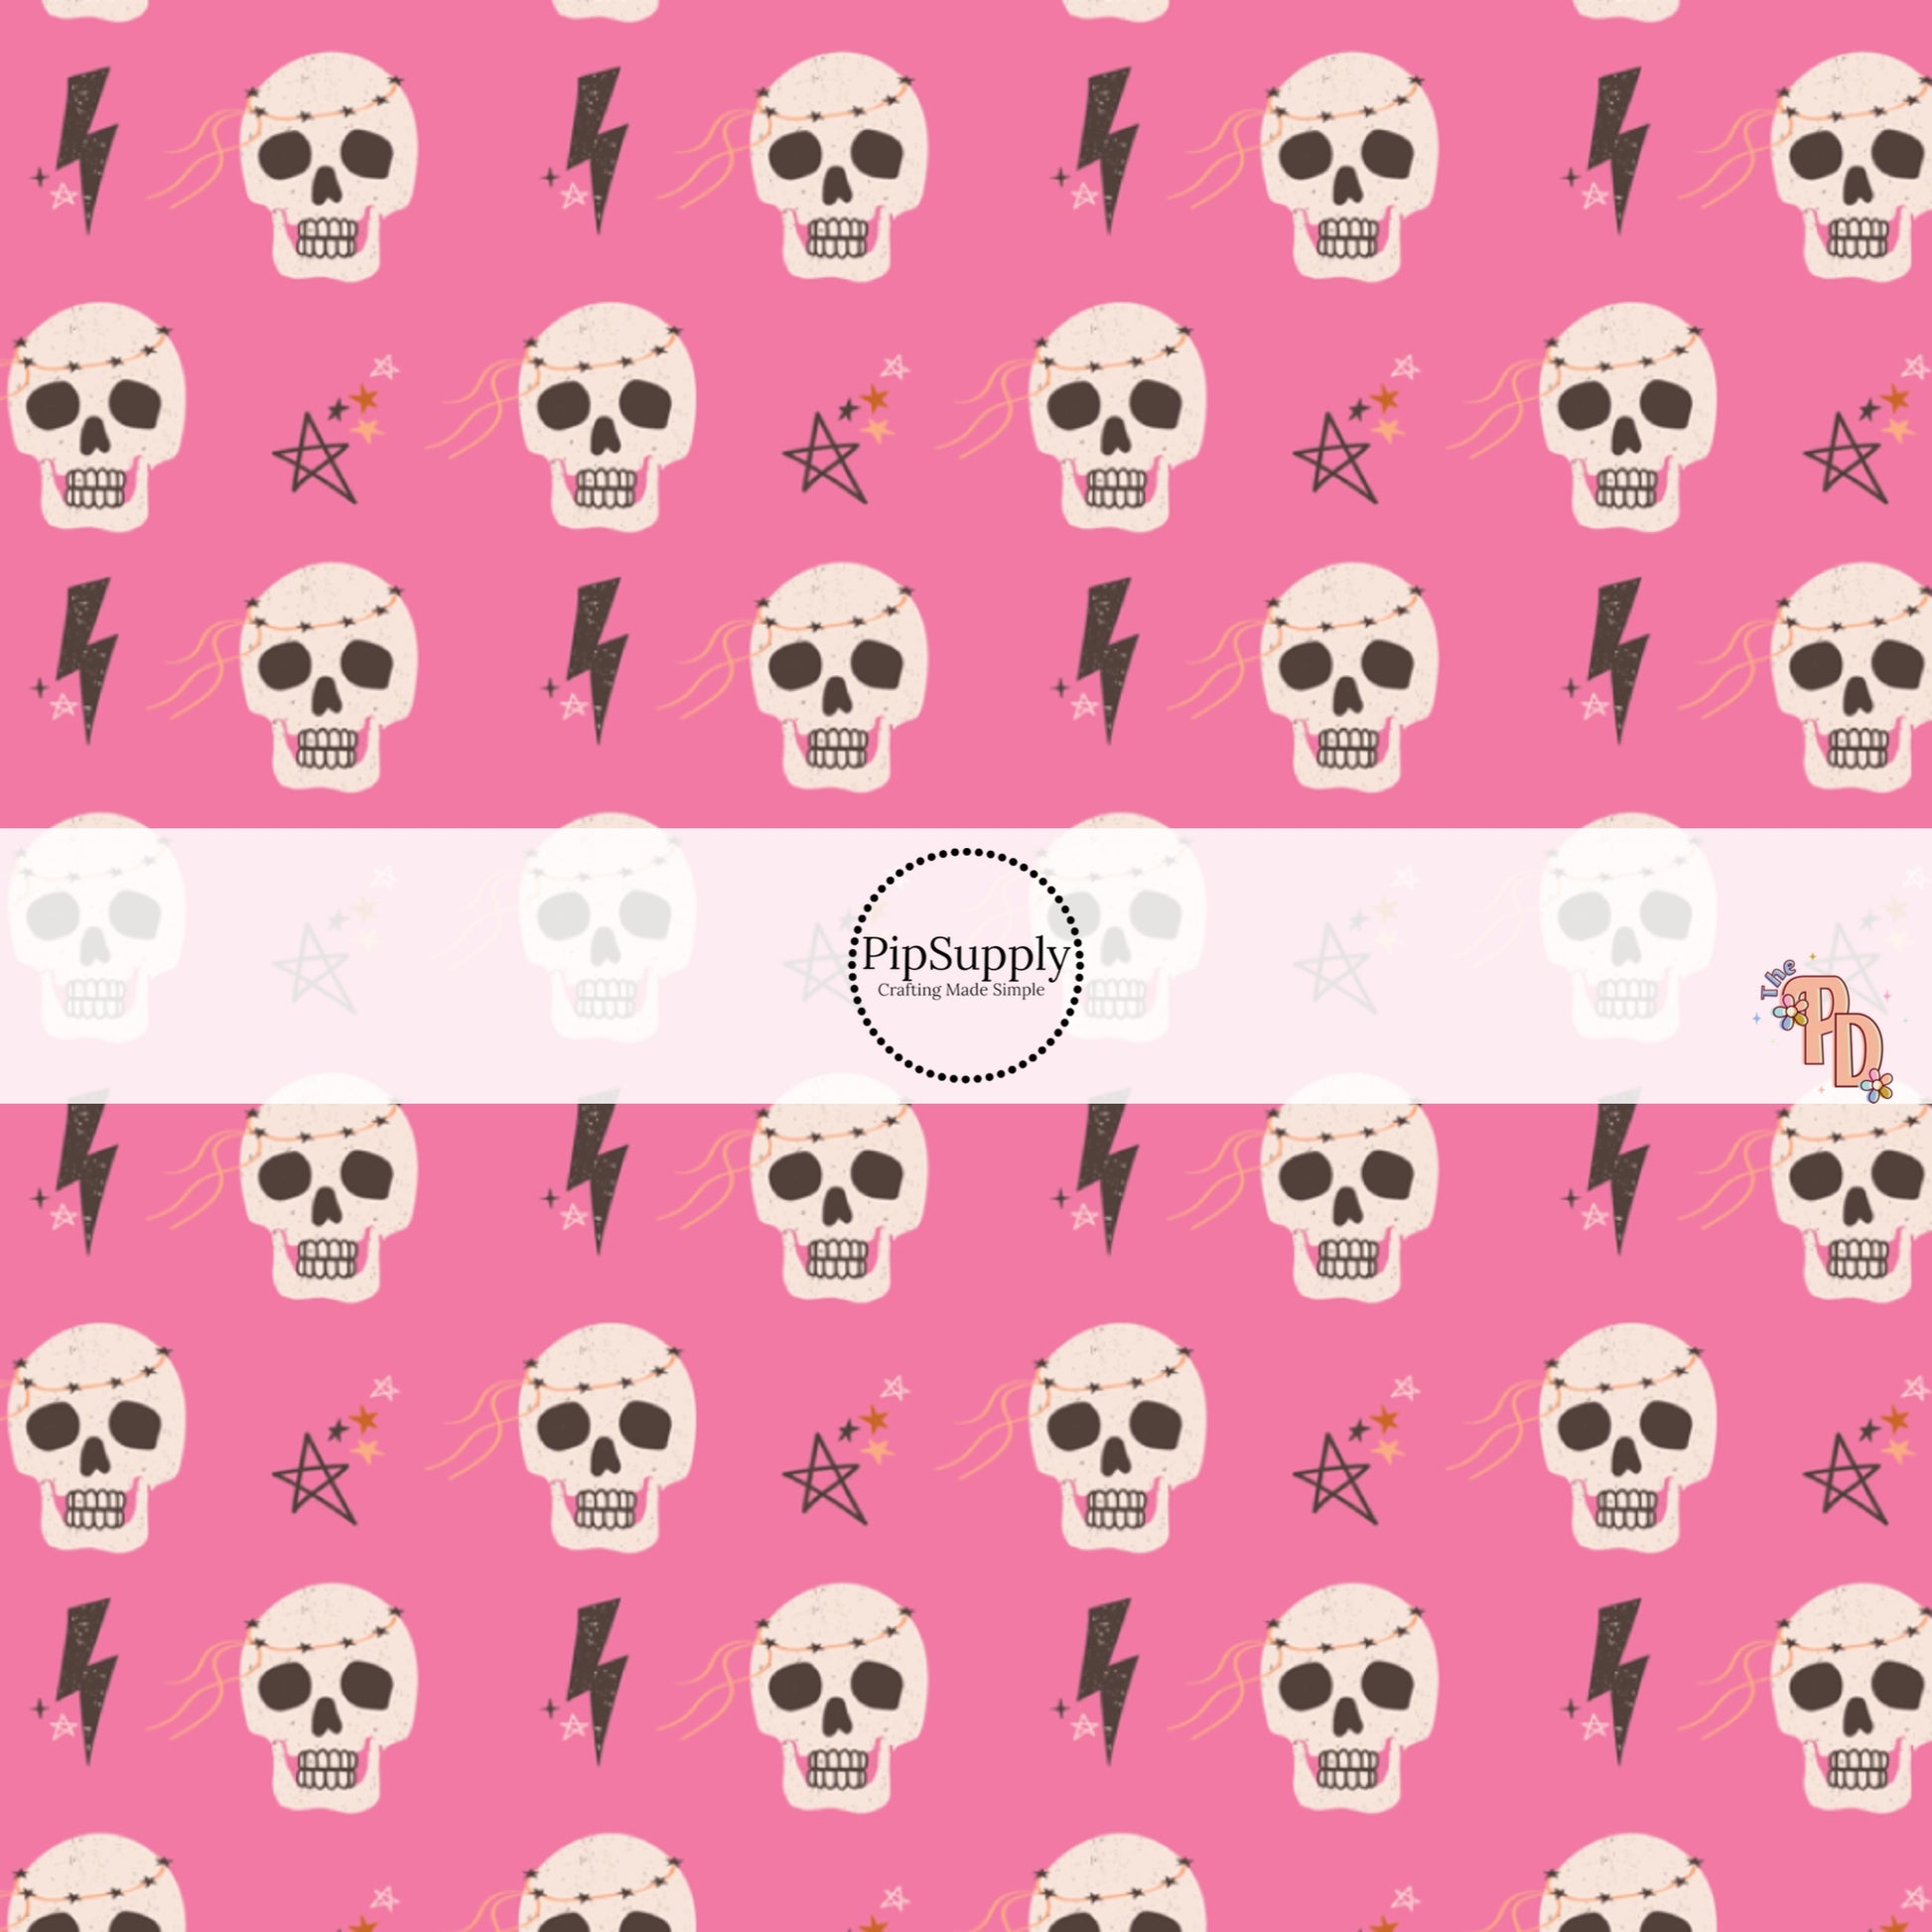 Hot Pink Fabric by the yard with skulls, lightning bolts, and stars.